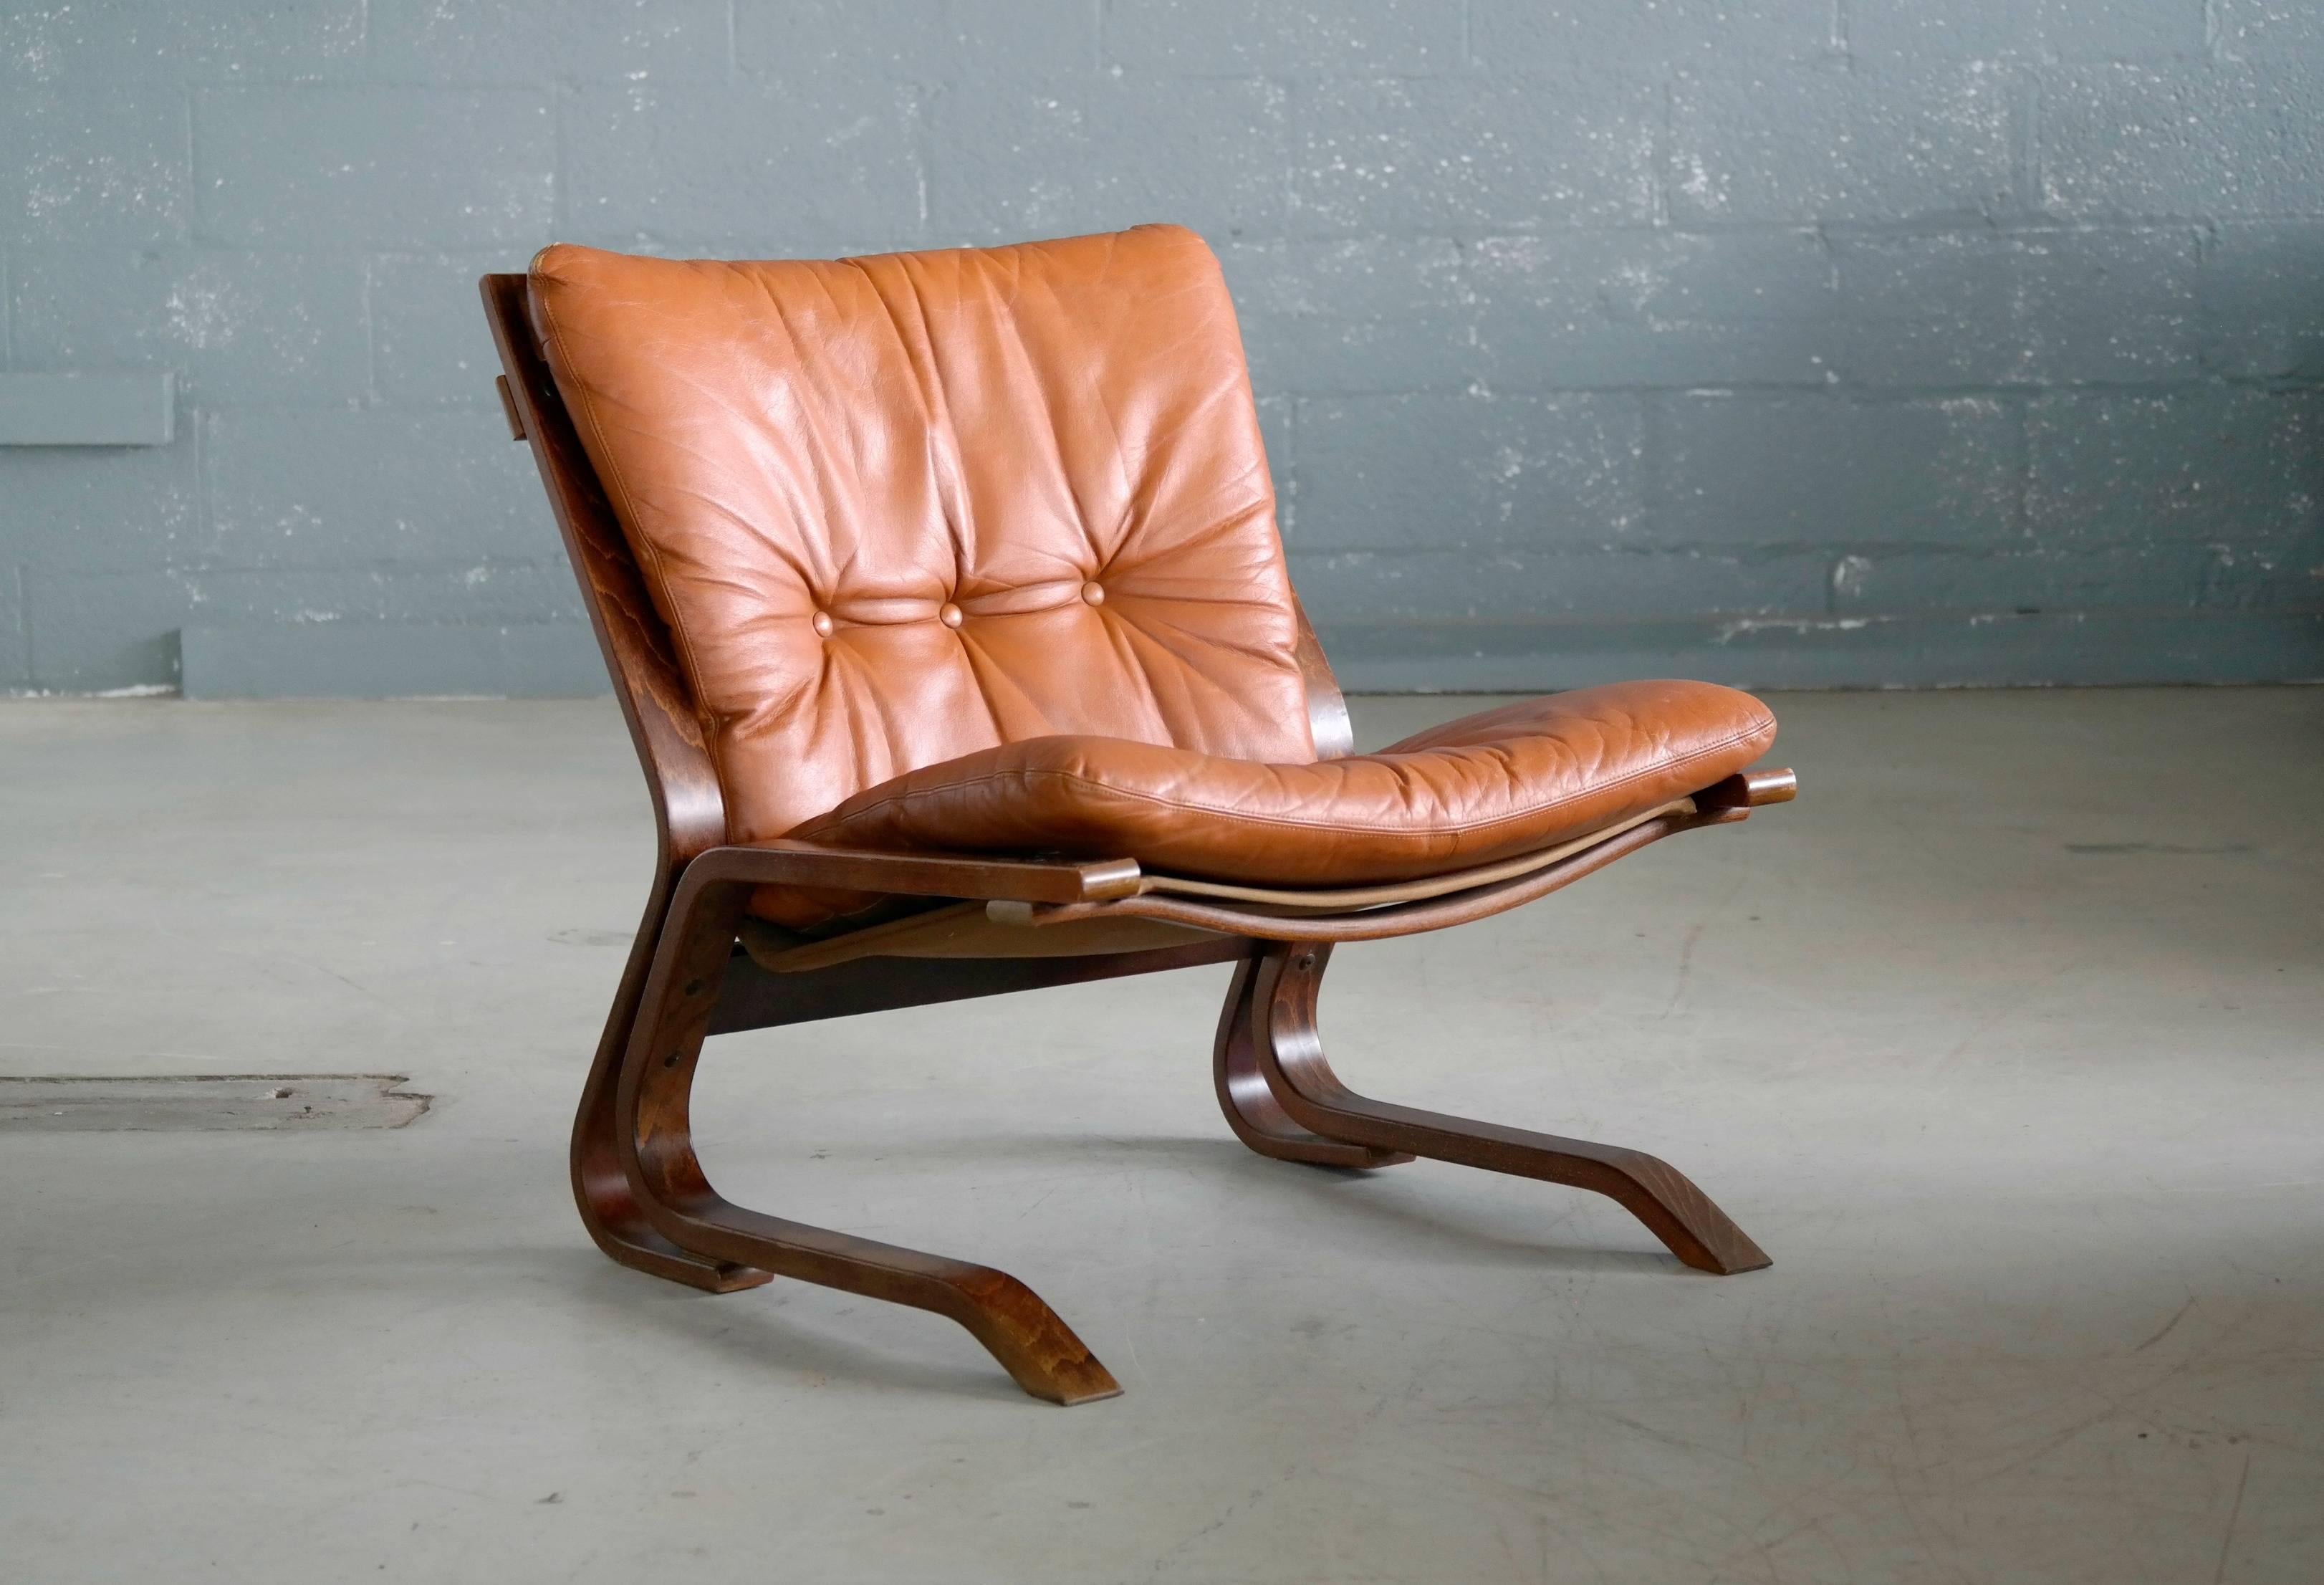 Beautiful easy chair in rosewood stained laminated beechwood with cognac colored cushion in a canvas sling designed circa 1967 by Oddvin Rykken of Norway and produced early 1970s by Rykken and Co. While similar in style to the popular designs by